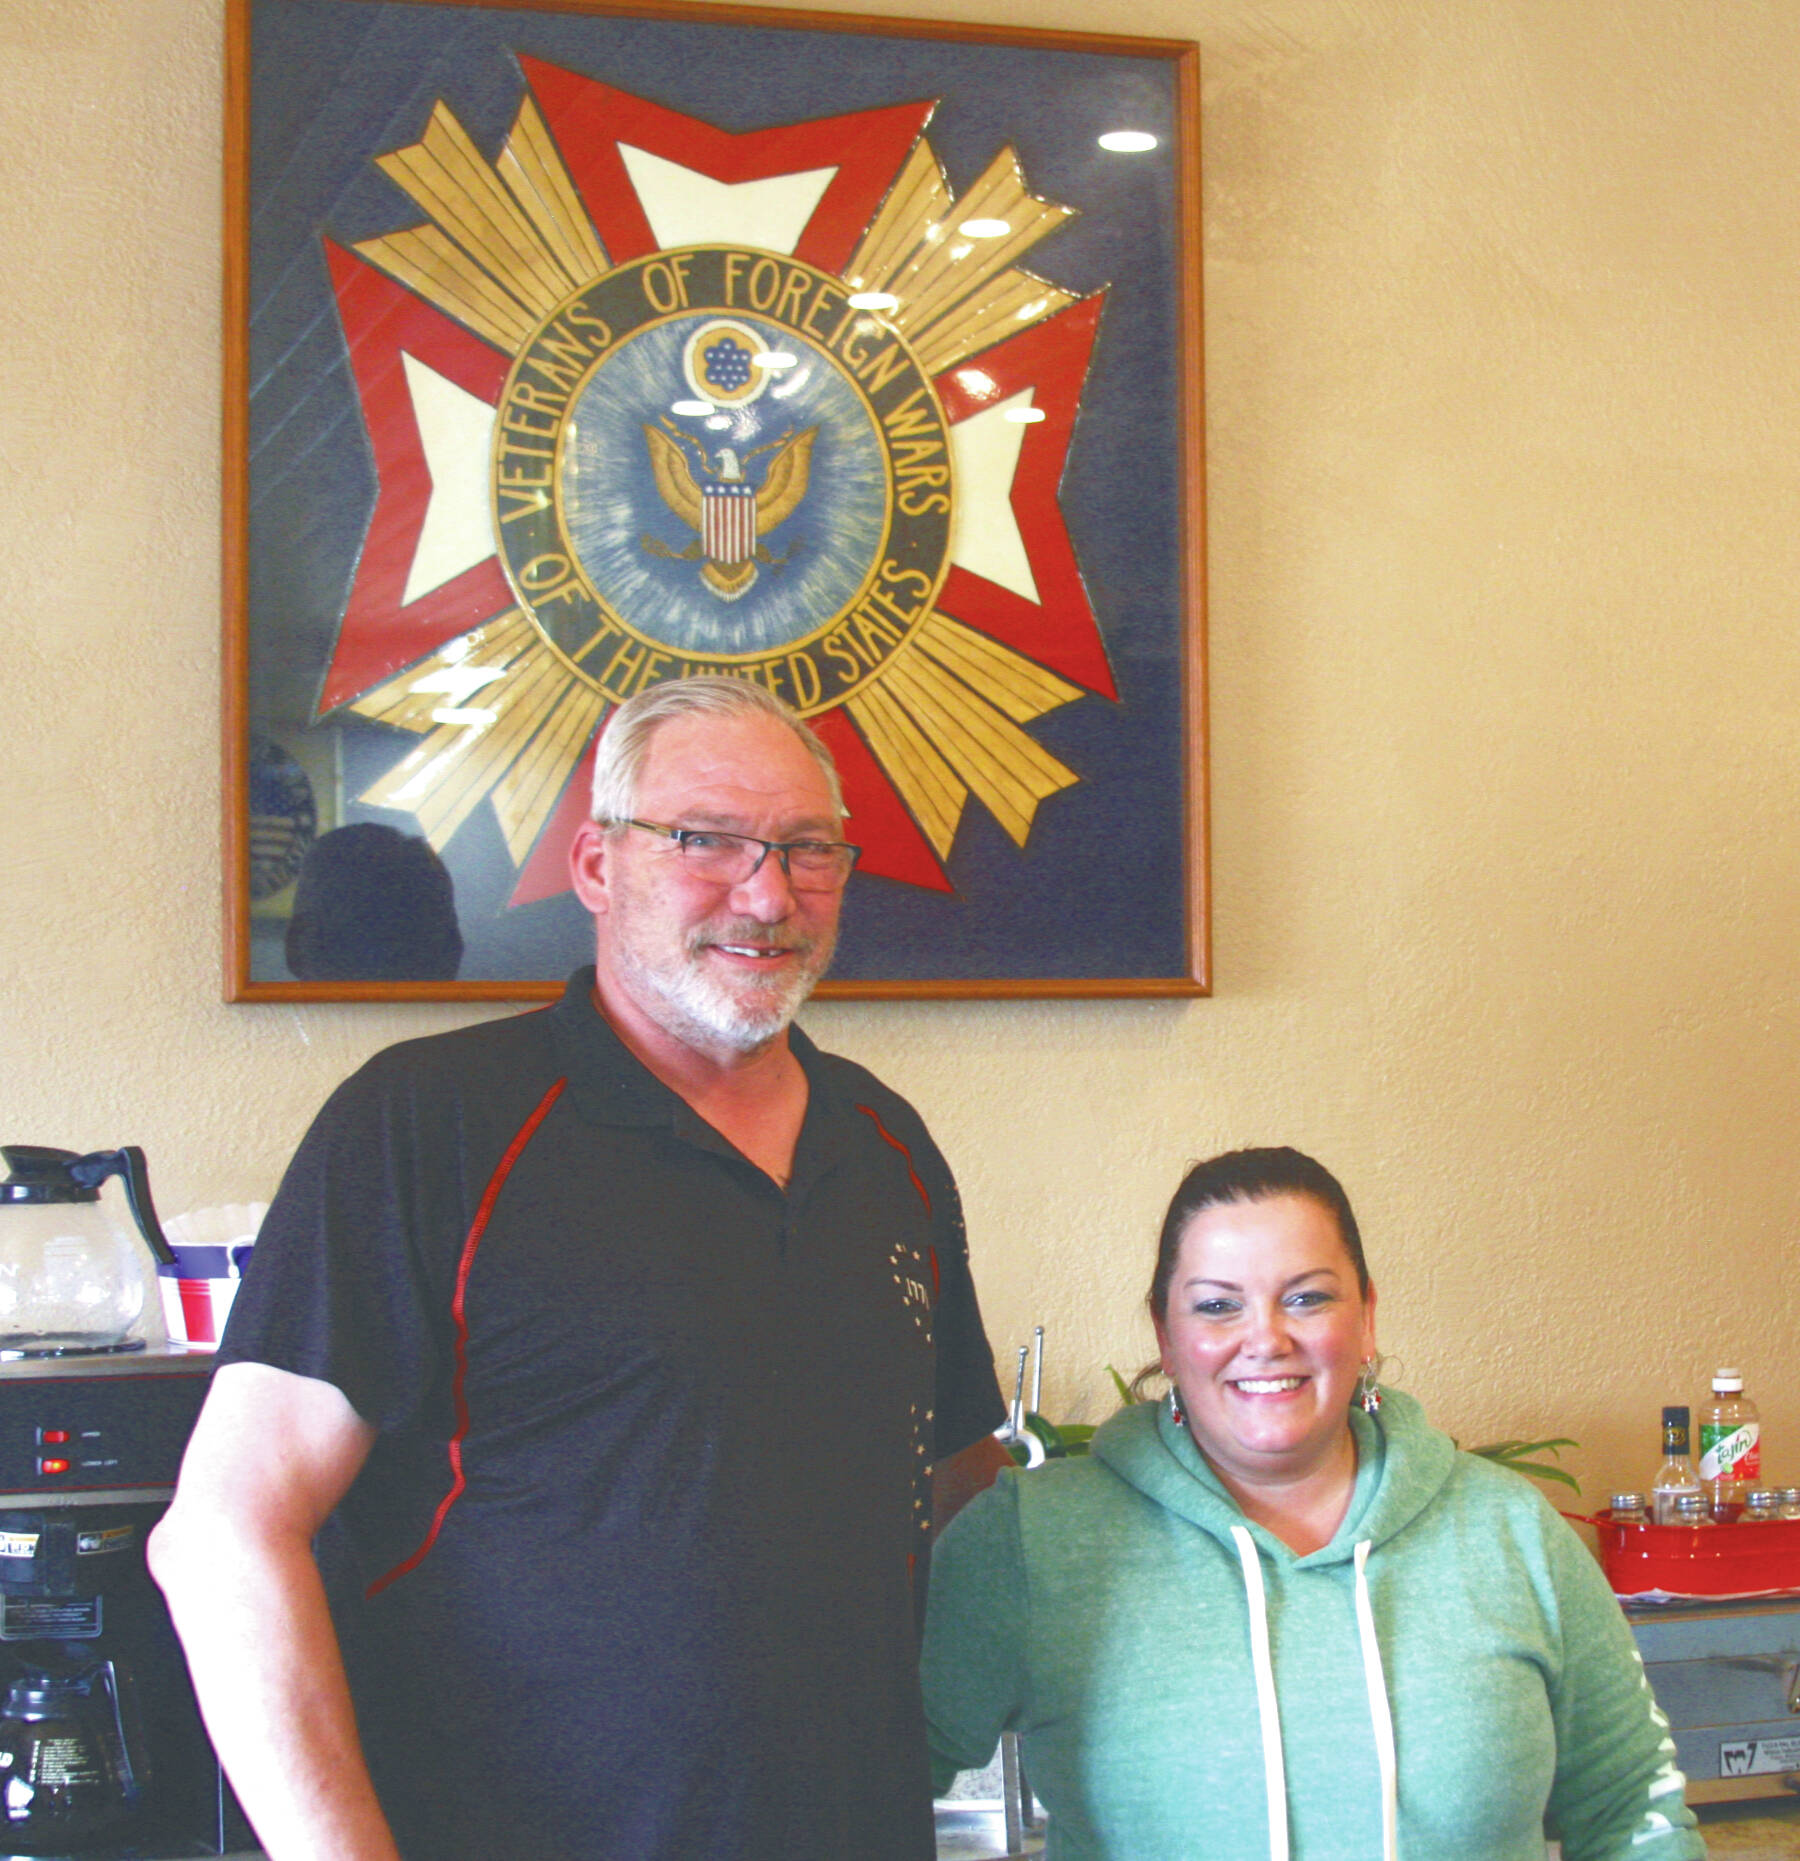 Photo by Delcenia Cosman
VFW Post 10221 commander Chuck Collins and canteen manager Heidi Adams celebrate the post’s grand reopening on Saturday.